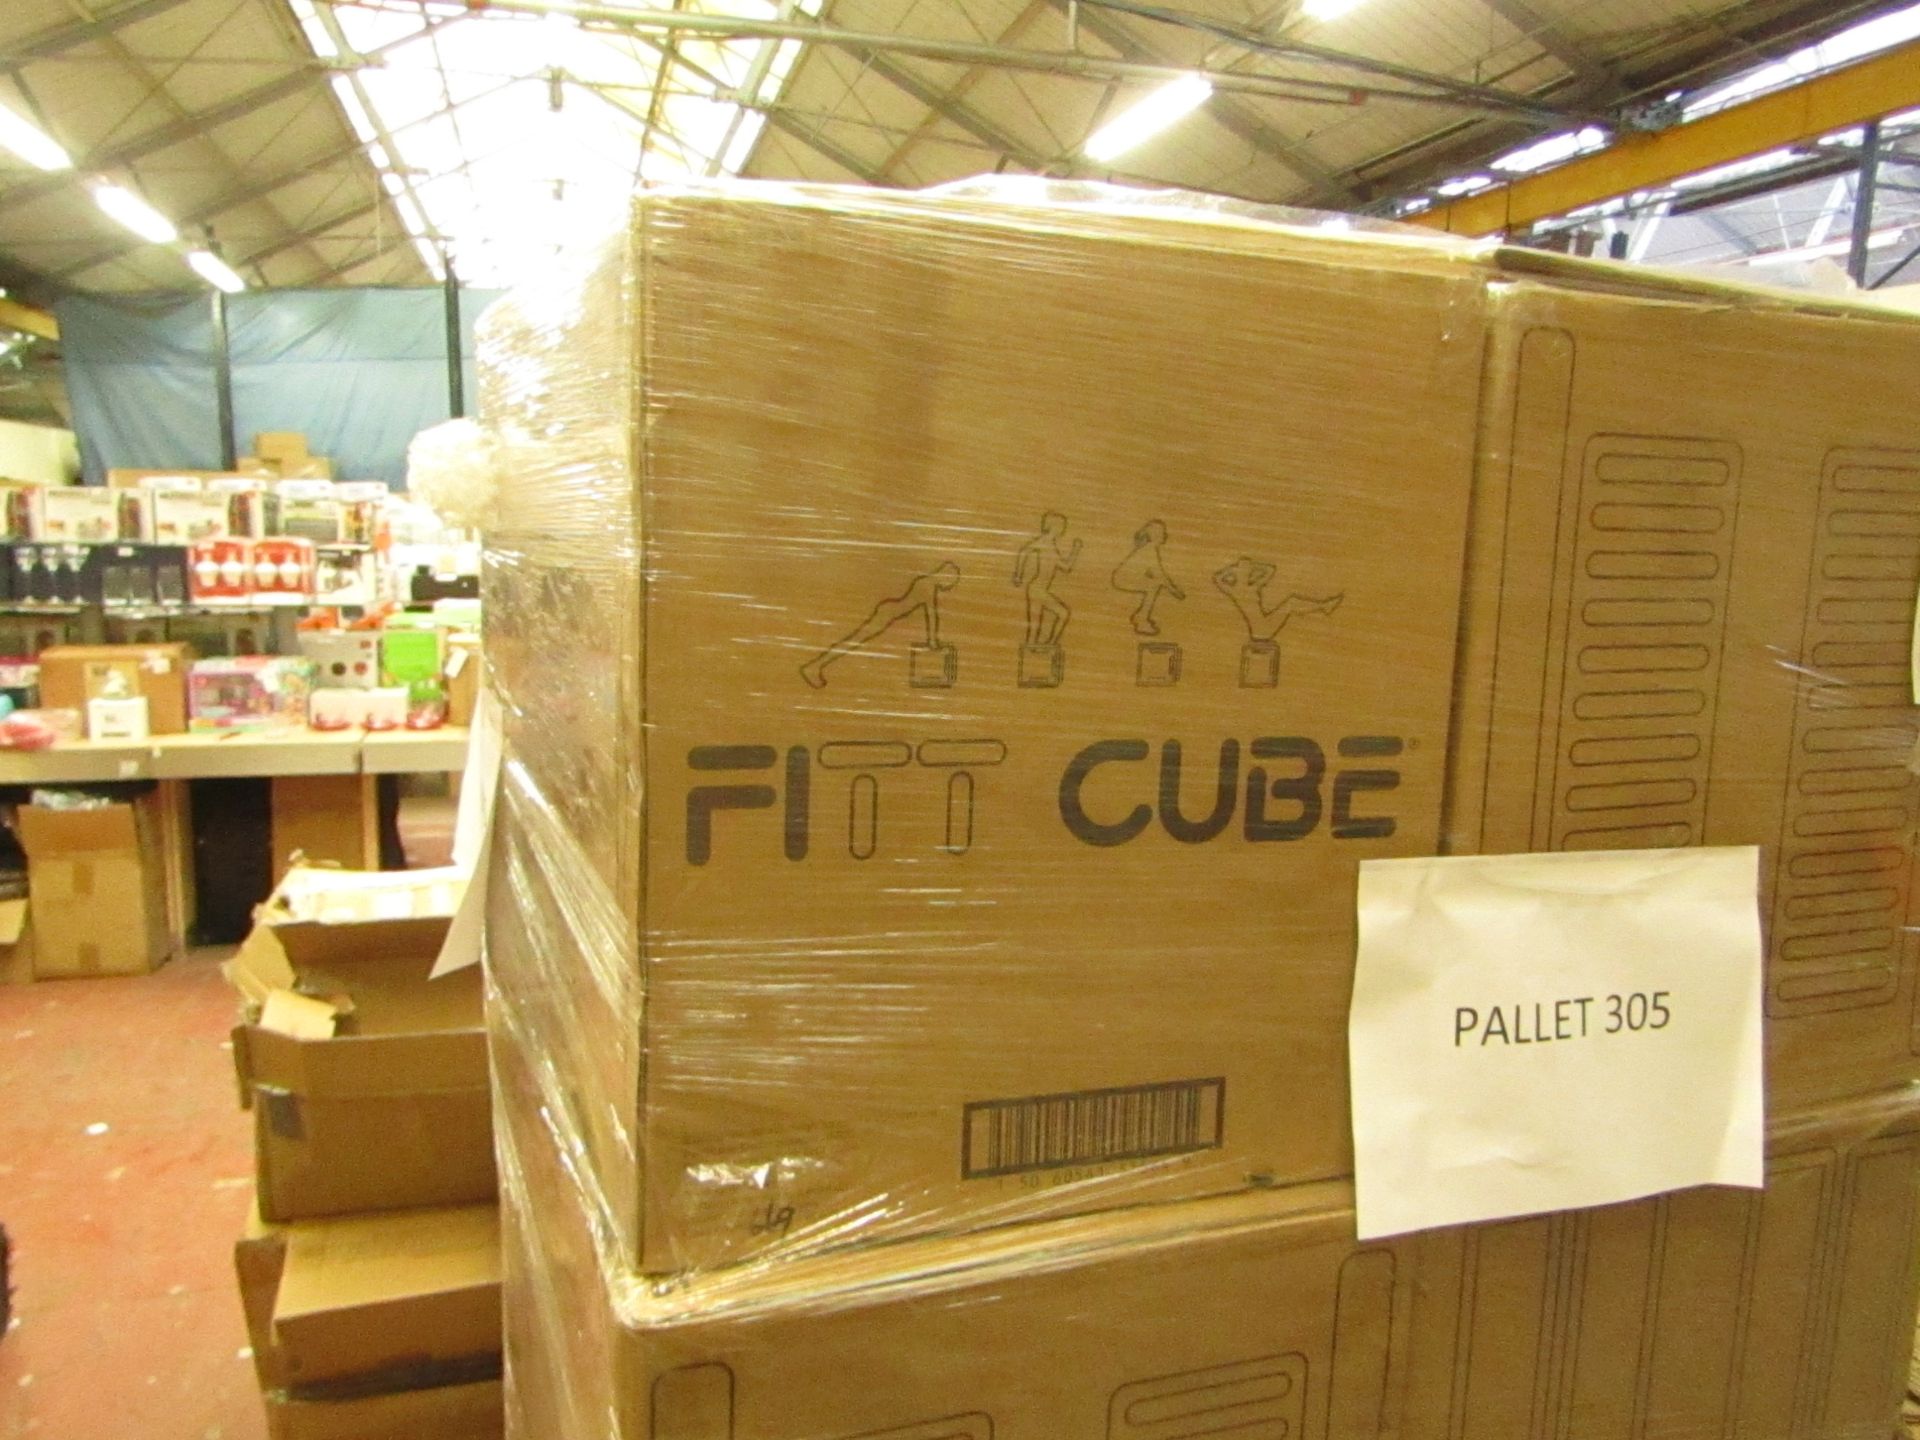 1x | NEW IMAGE FITT CUBE | UNTESTED & BOXED | NO ONLINE RE-SALE | SKU C50601515649 | RRP £129.99 |